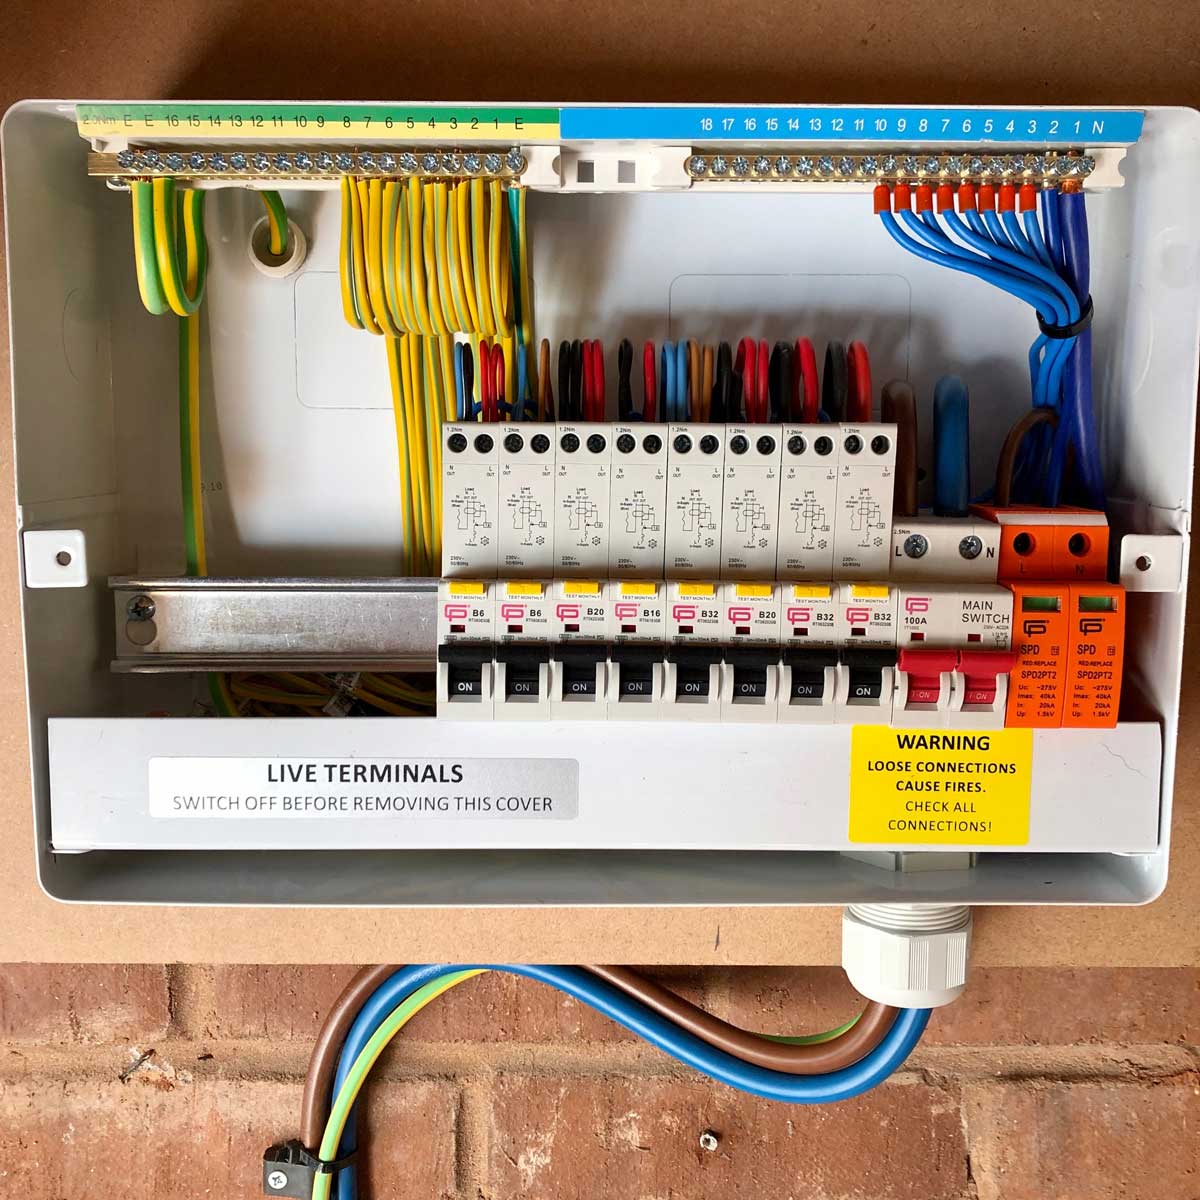 A&#x20;consumer&#x20;unit&#x20;upgrade&#x20;for&#x20;a&#x20;home&#x20;win&#x20;East&#x20;Budleigh